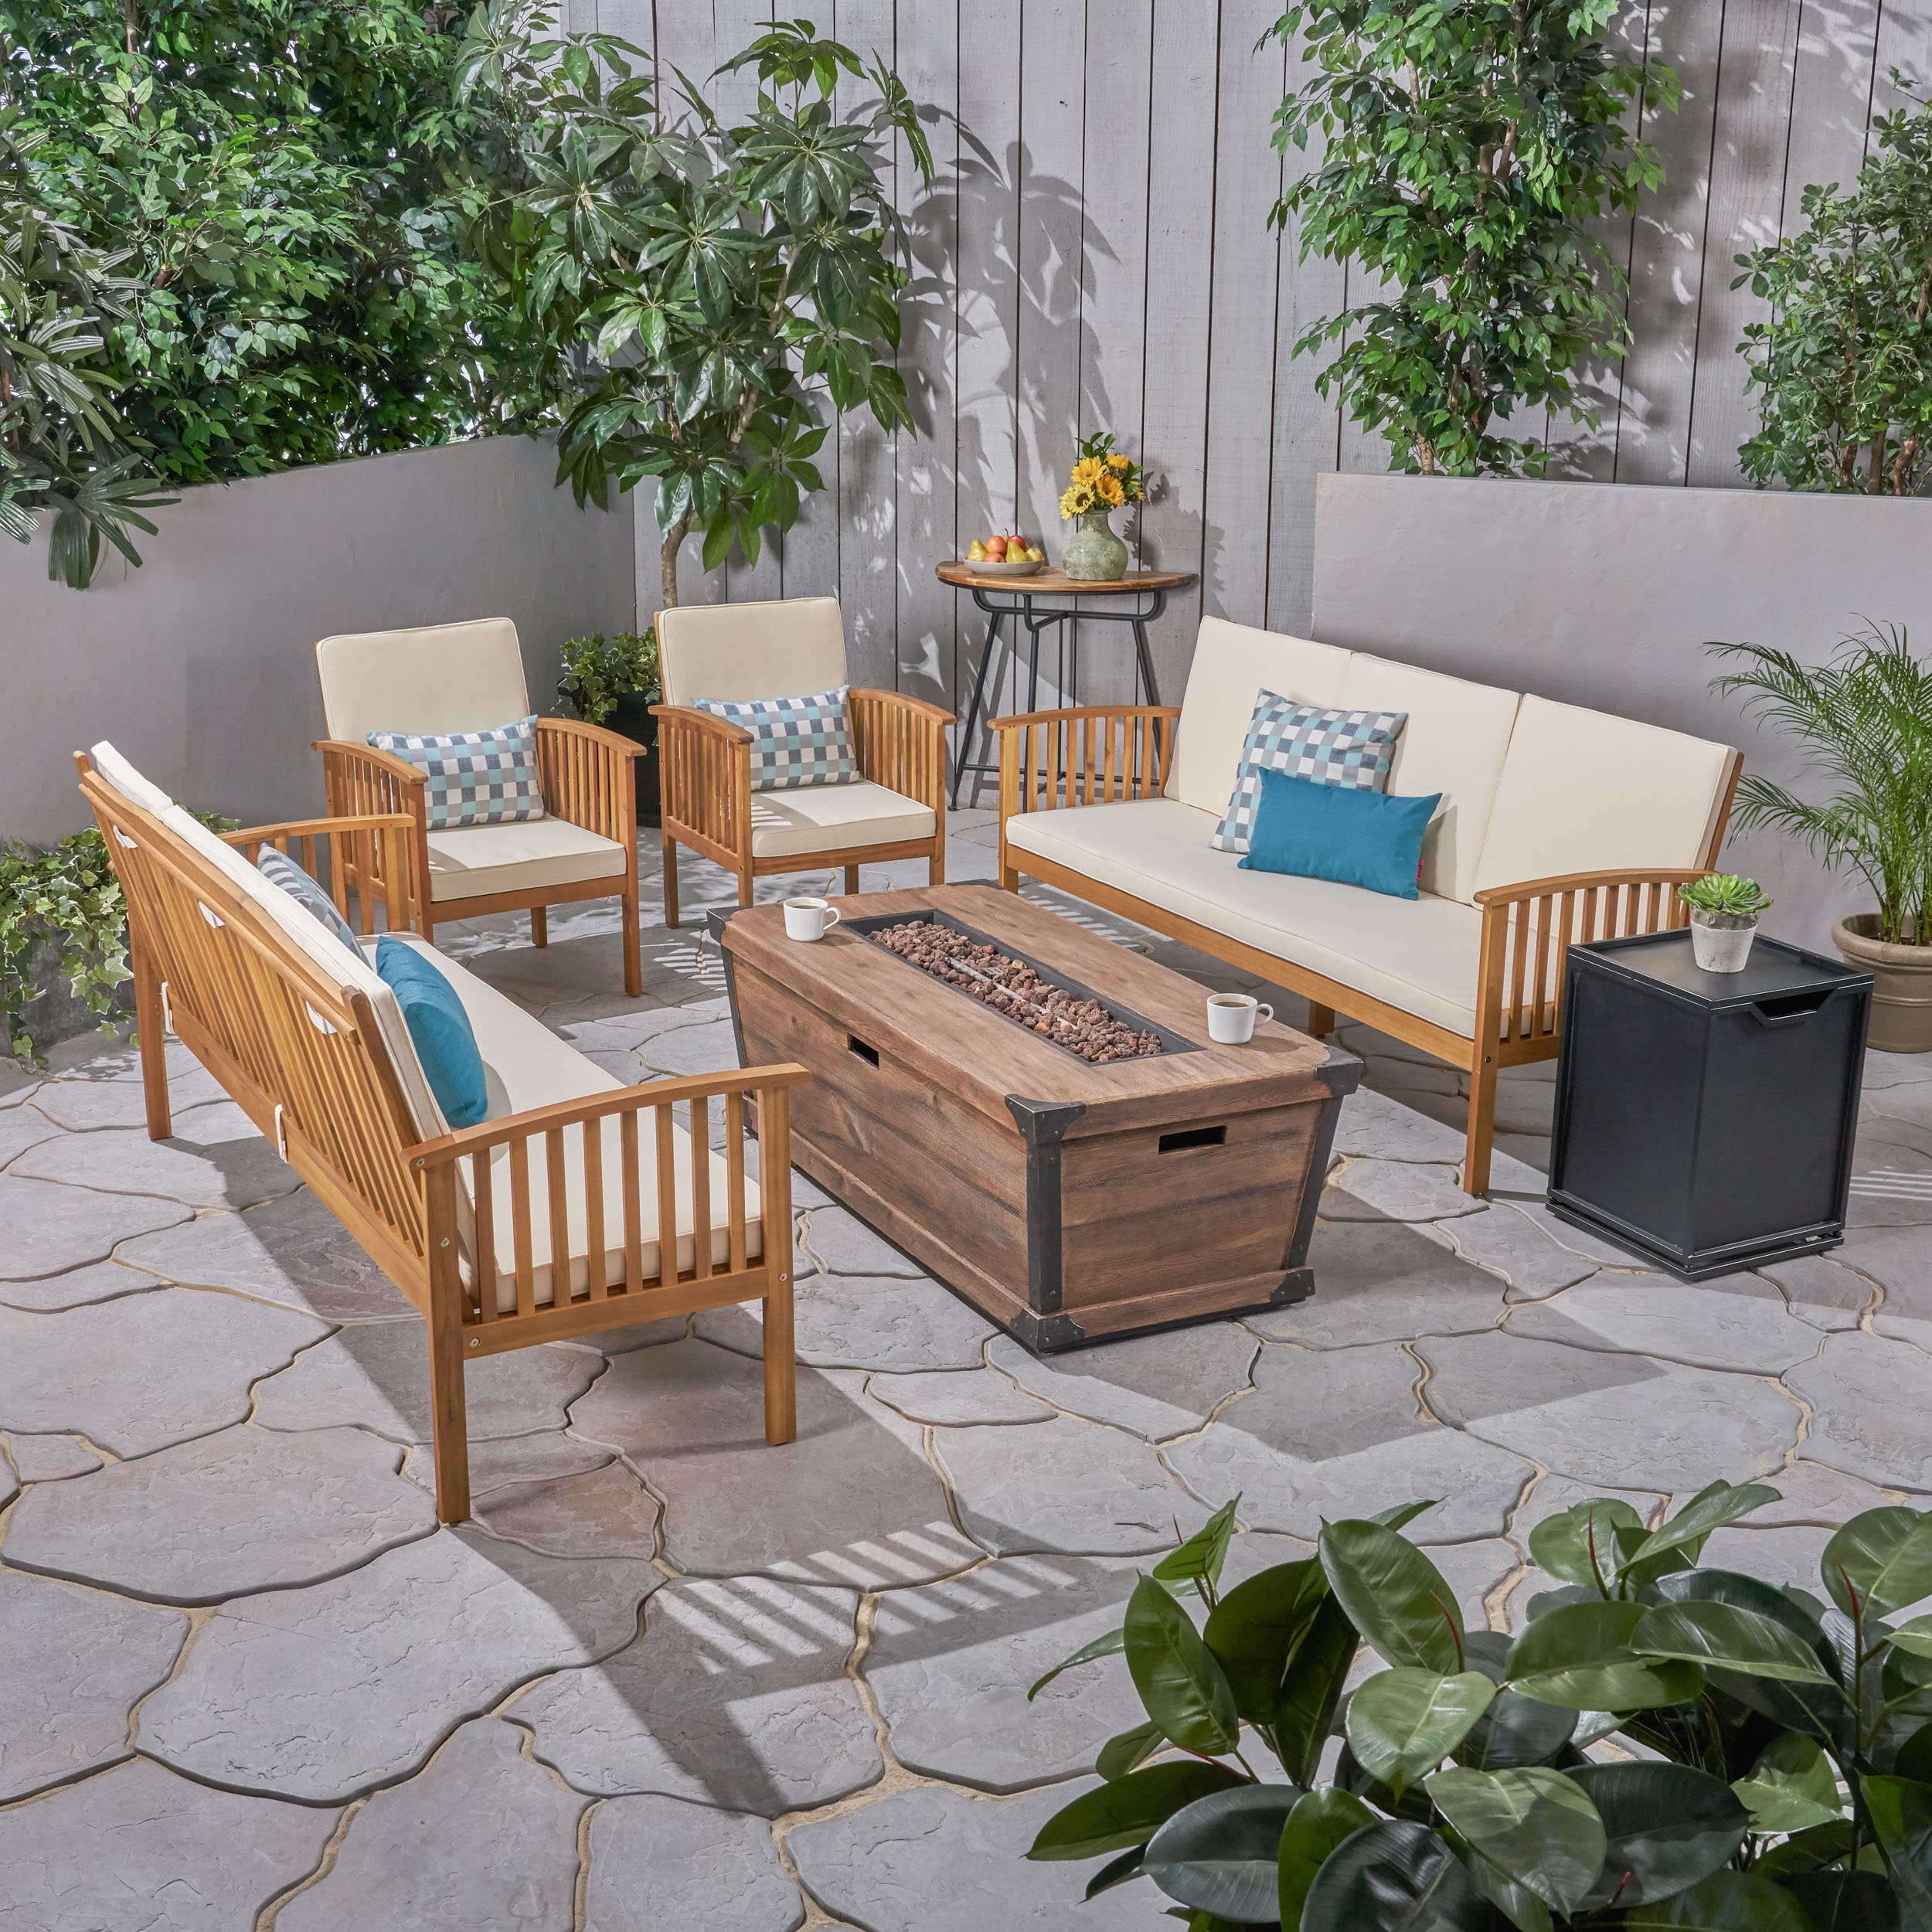 Tucson Outdoor 6 Piece Acacia Wood Conversational Sofa Set with Cushions and Fire Pit, Teak, Cream, Brown - image 1 of 1